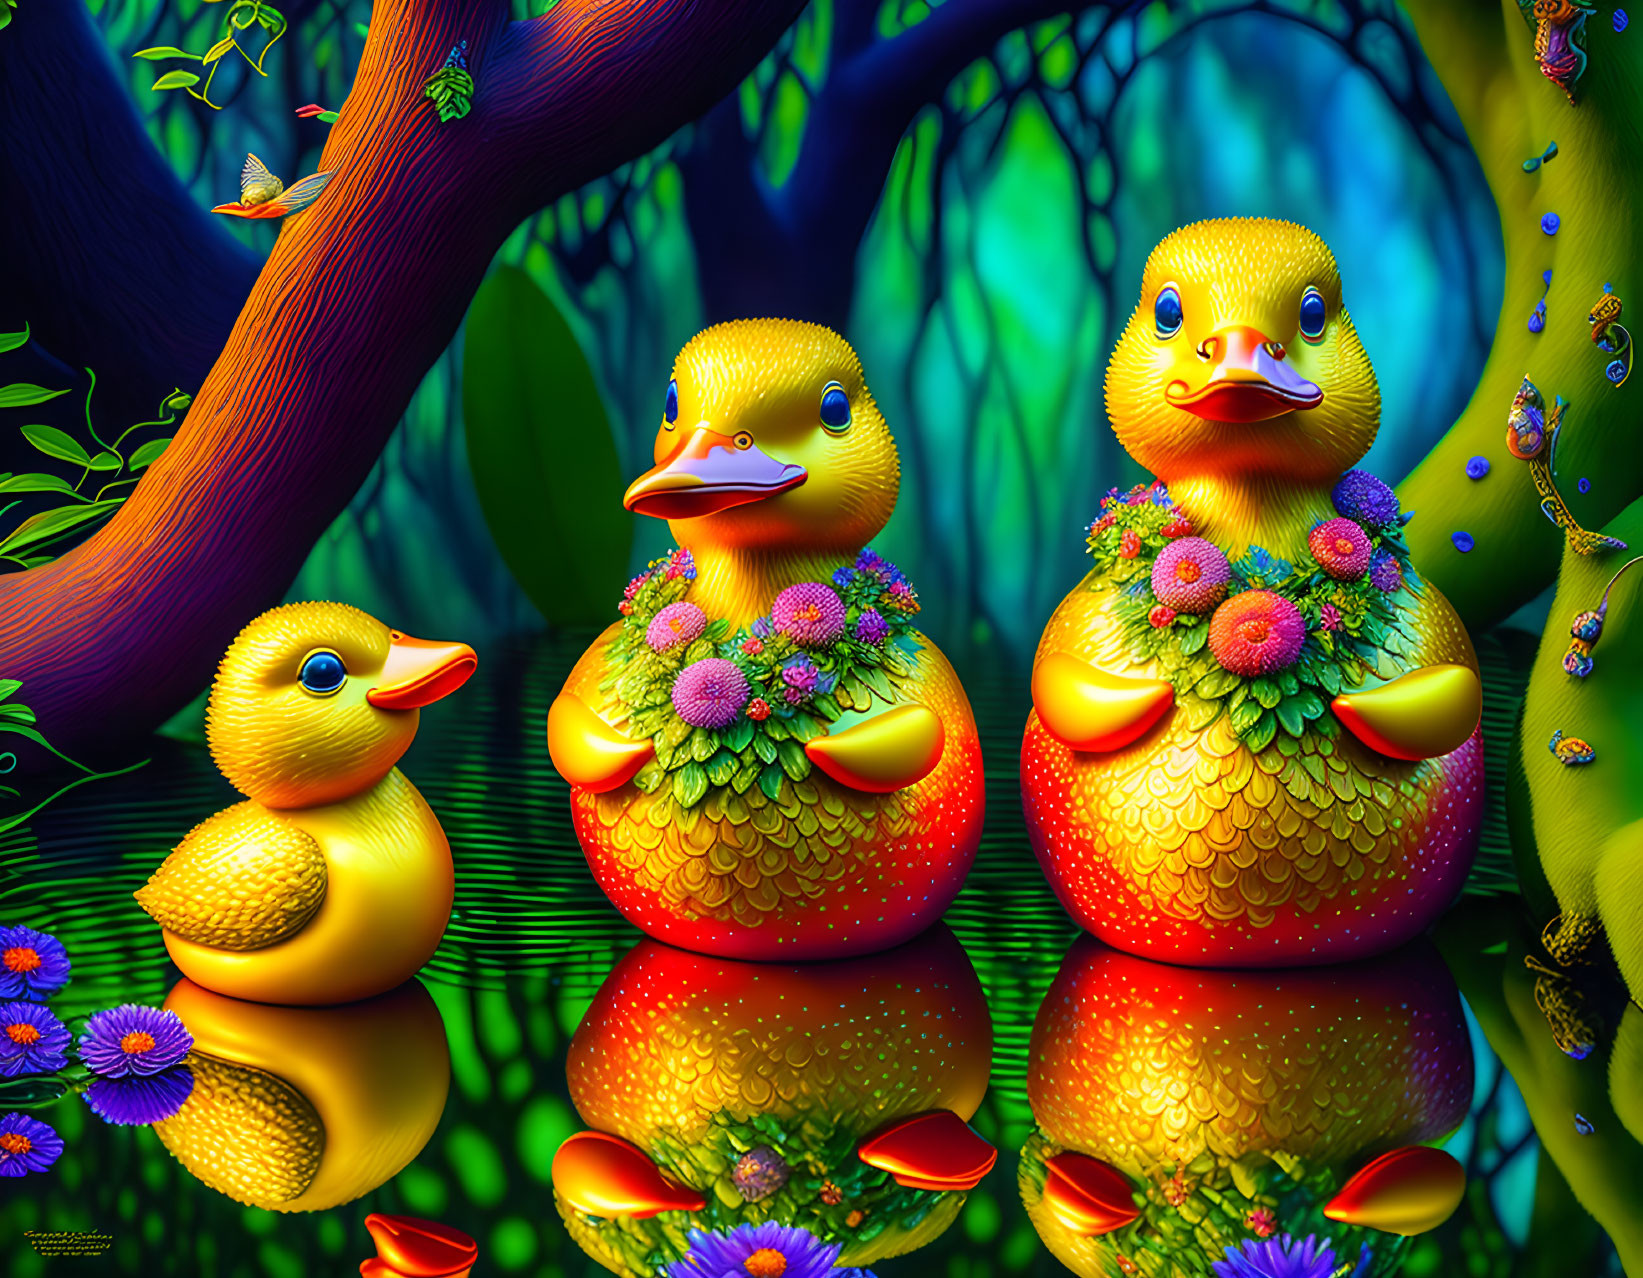 Colorful Rubber Ducks with Flowers in Forest Setting